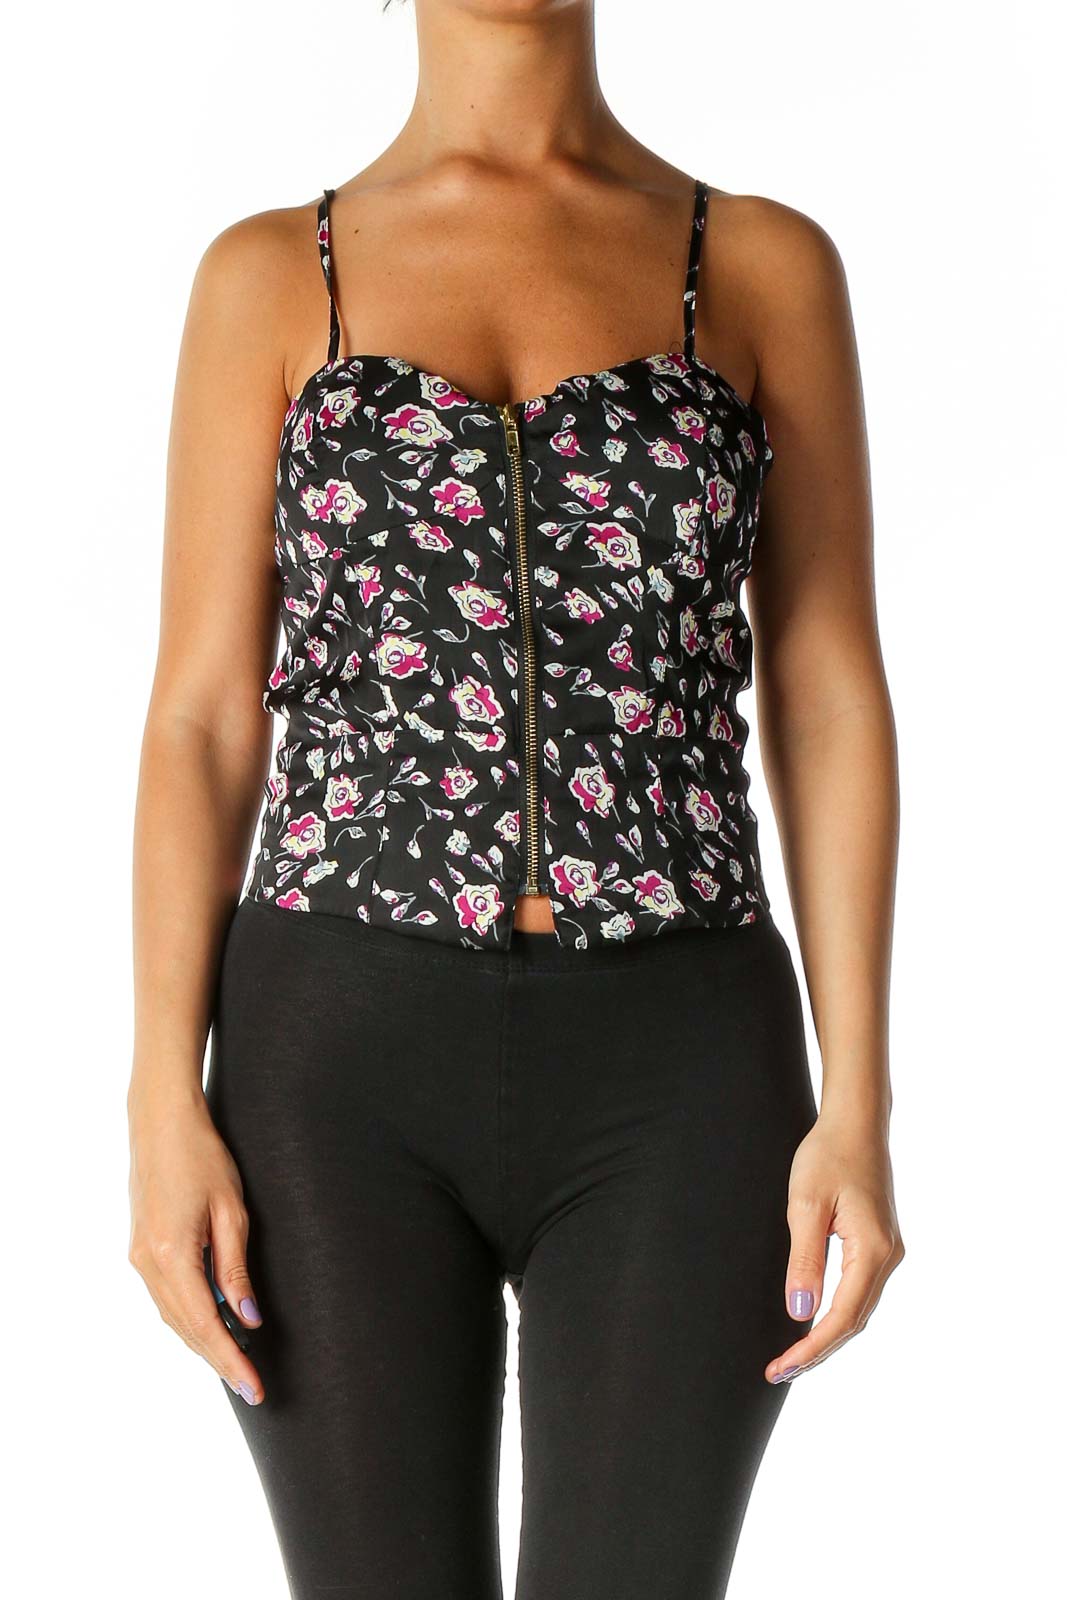 Black Floral Print Chic Top Front